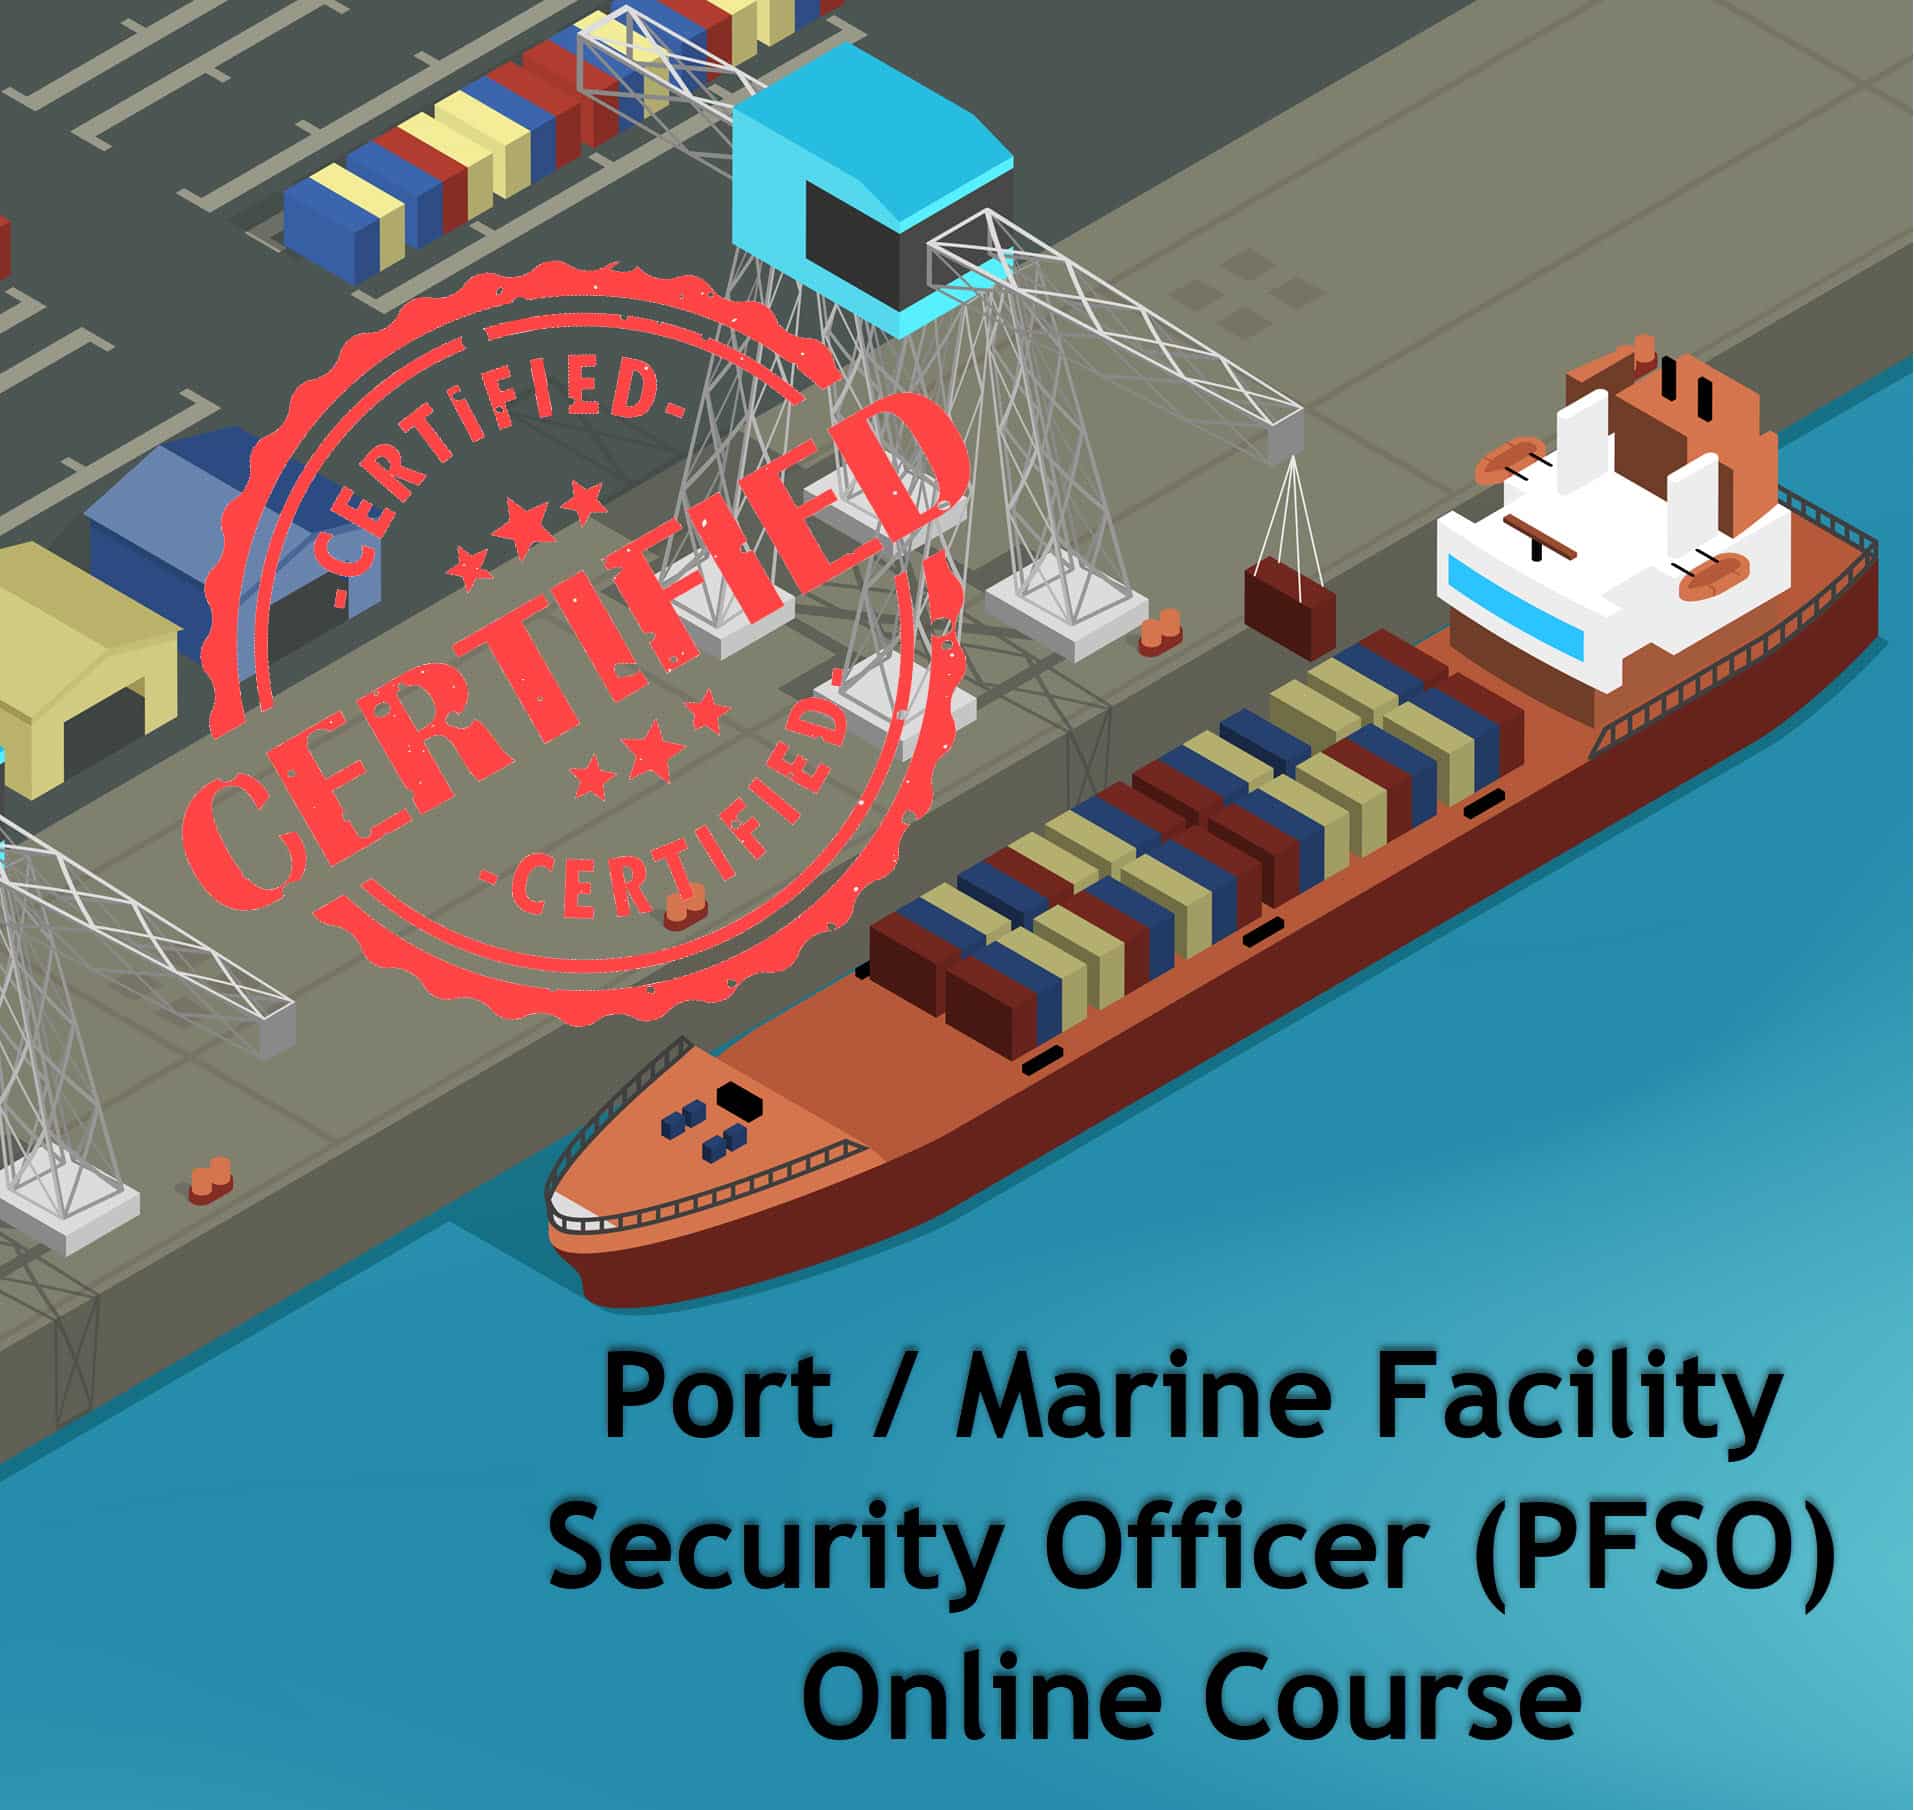 Port / Marine Facility Security Officer (PFSO) – Online Course